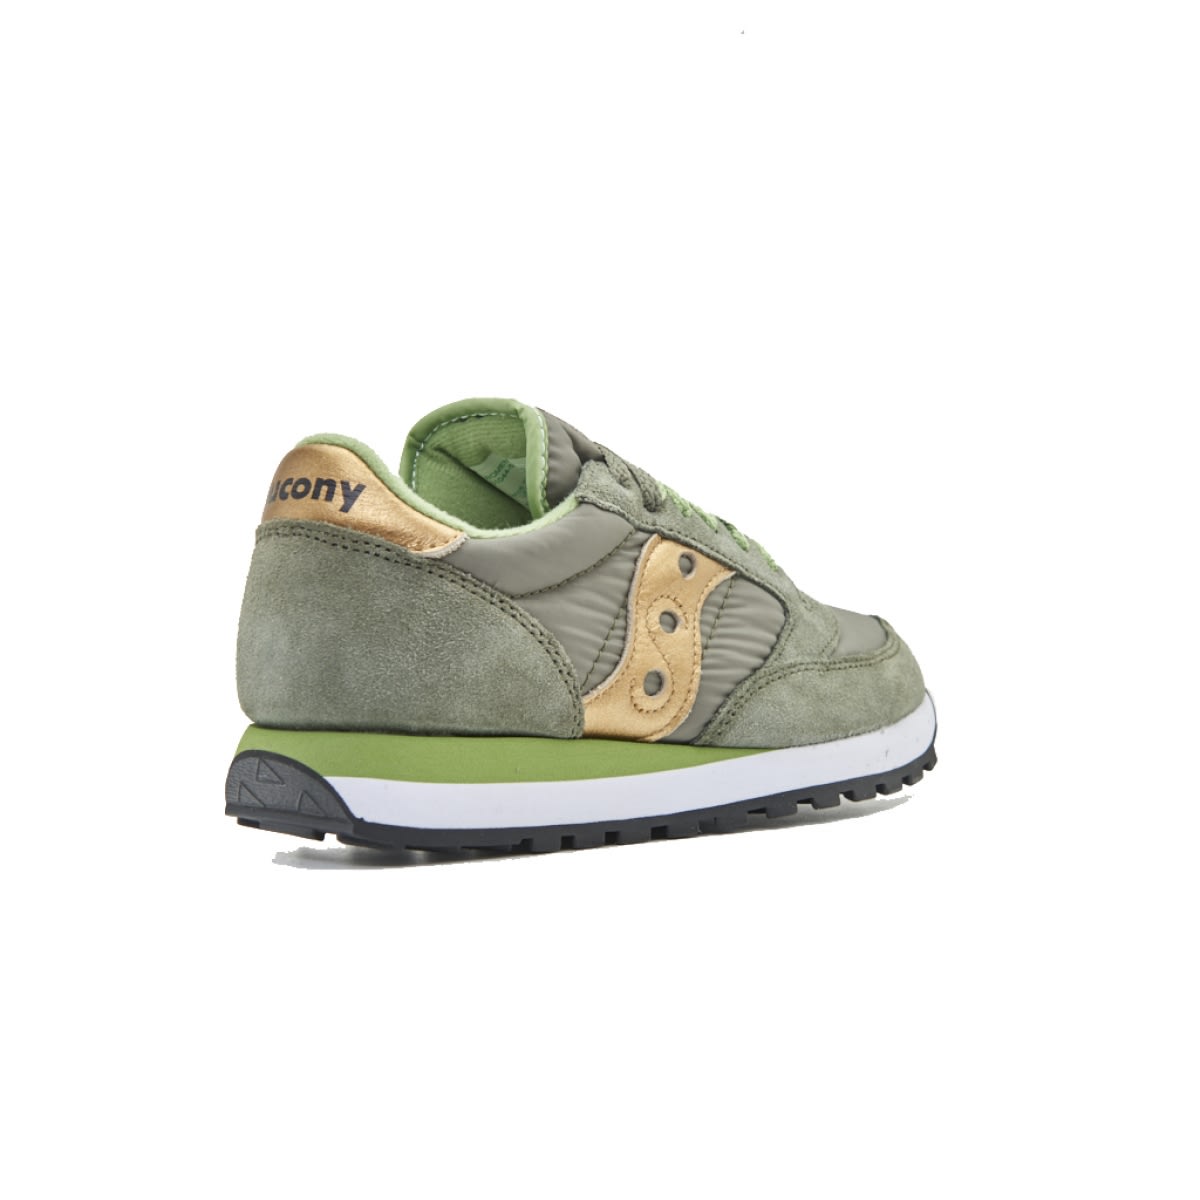 saucony olive gold